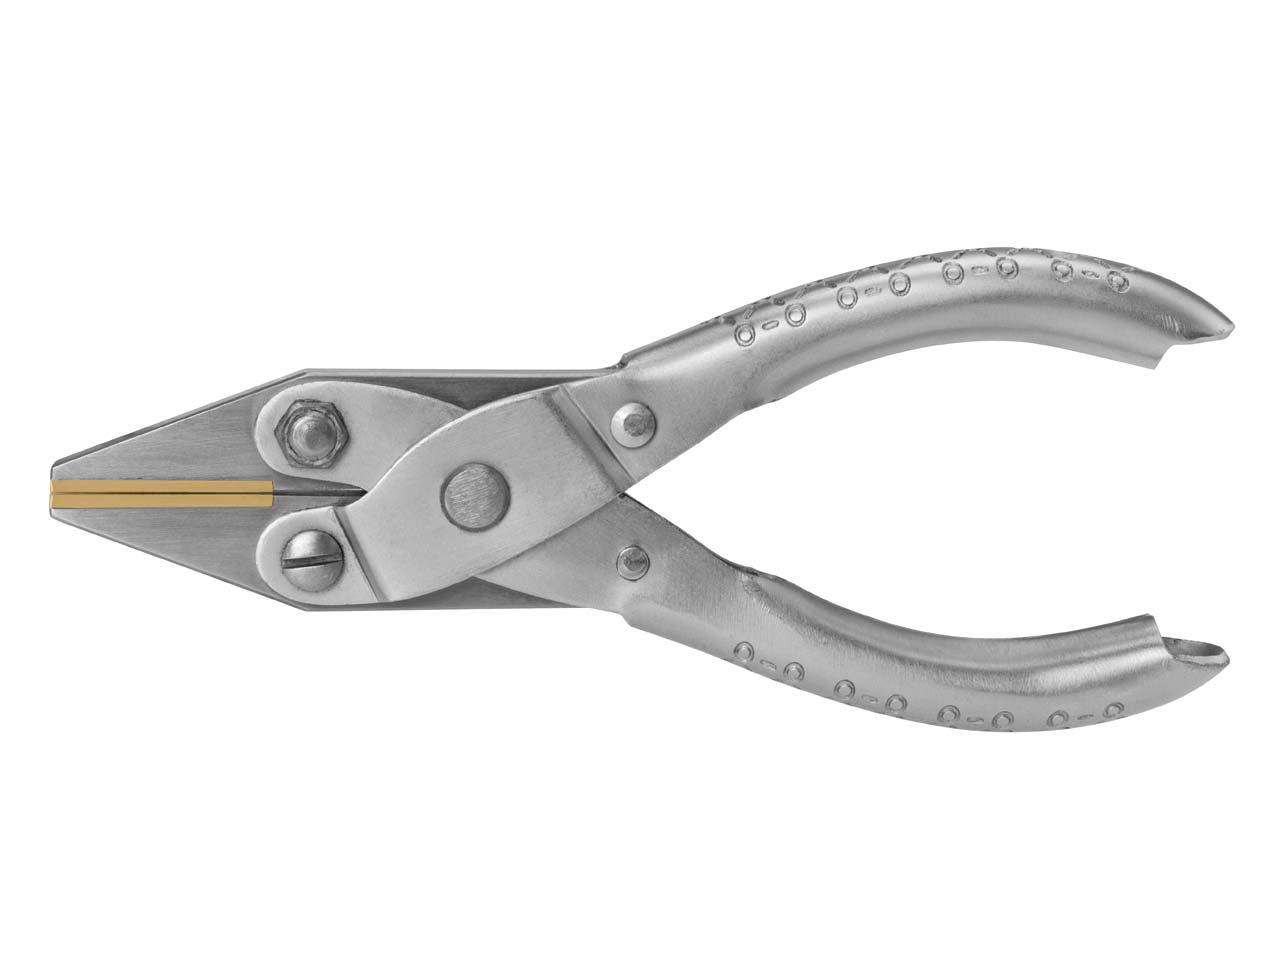 What are Classic Parallel Action Pliers?